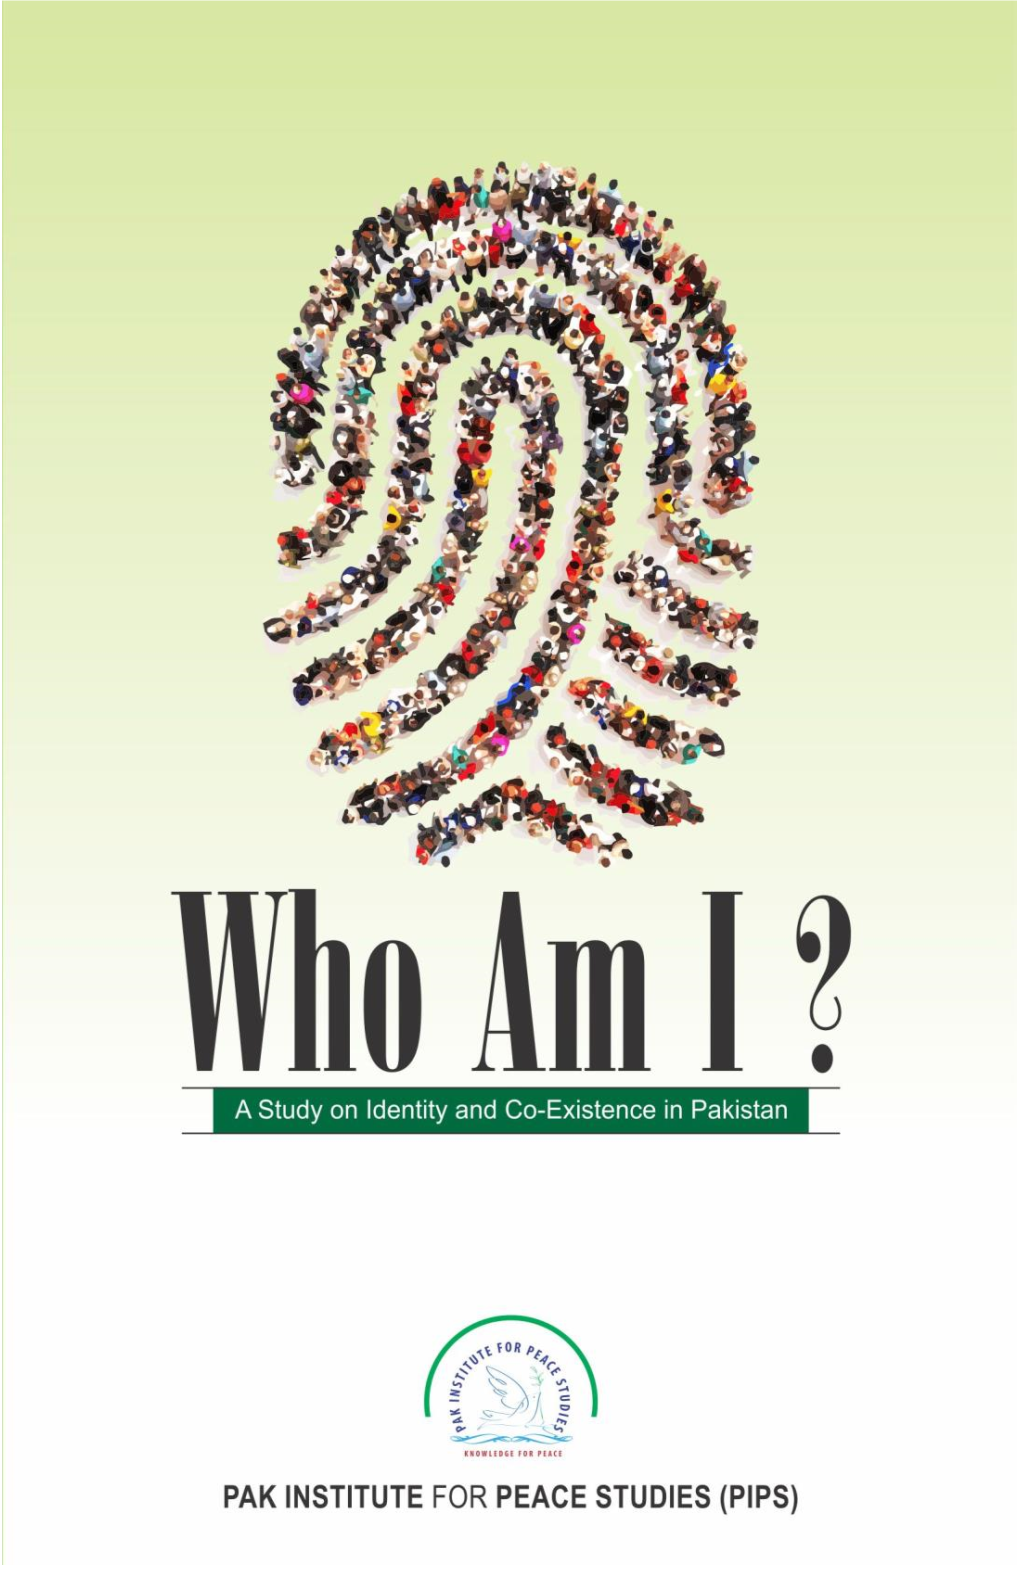 Who Am I? a Study on Identity and Co-Existence in Pakistan